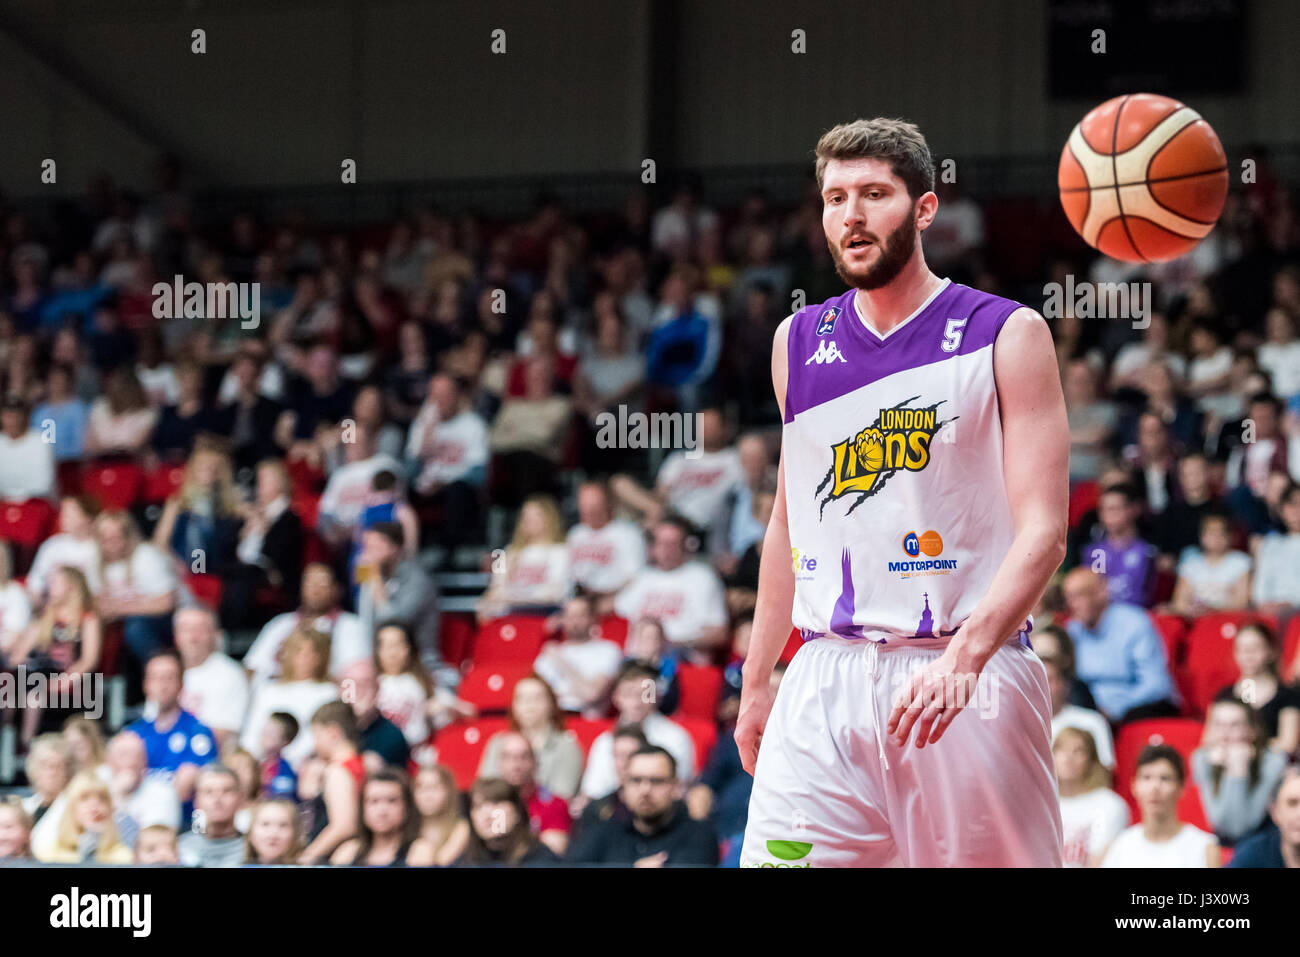 Leicester, UK, 7 May 2017.  The BBL 2nd Leg Semi Final Leicester Riders vs London Lions held in the Leicester Arena, Riders win 72 vs Lions 55 progressing to the final. London Lion's  Zac Wells (05) joining the game.  ©pmgimaging/Alamy Live News Stock Photo